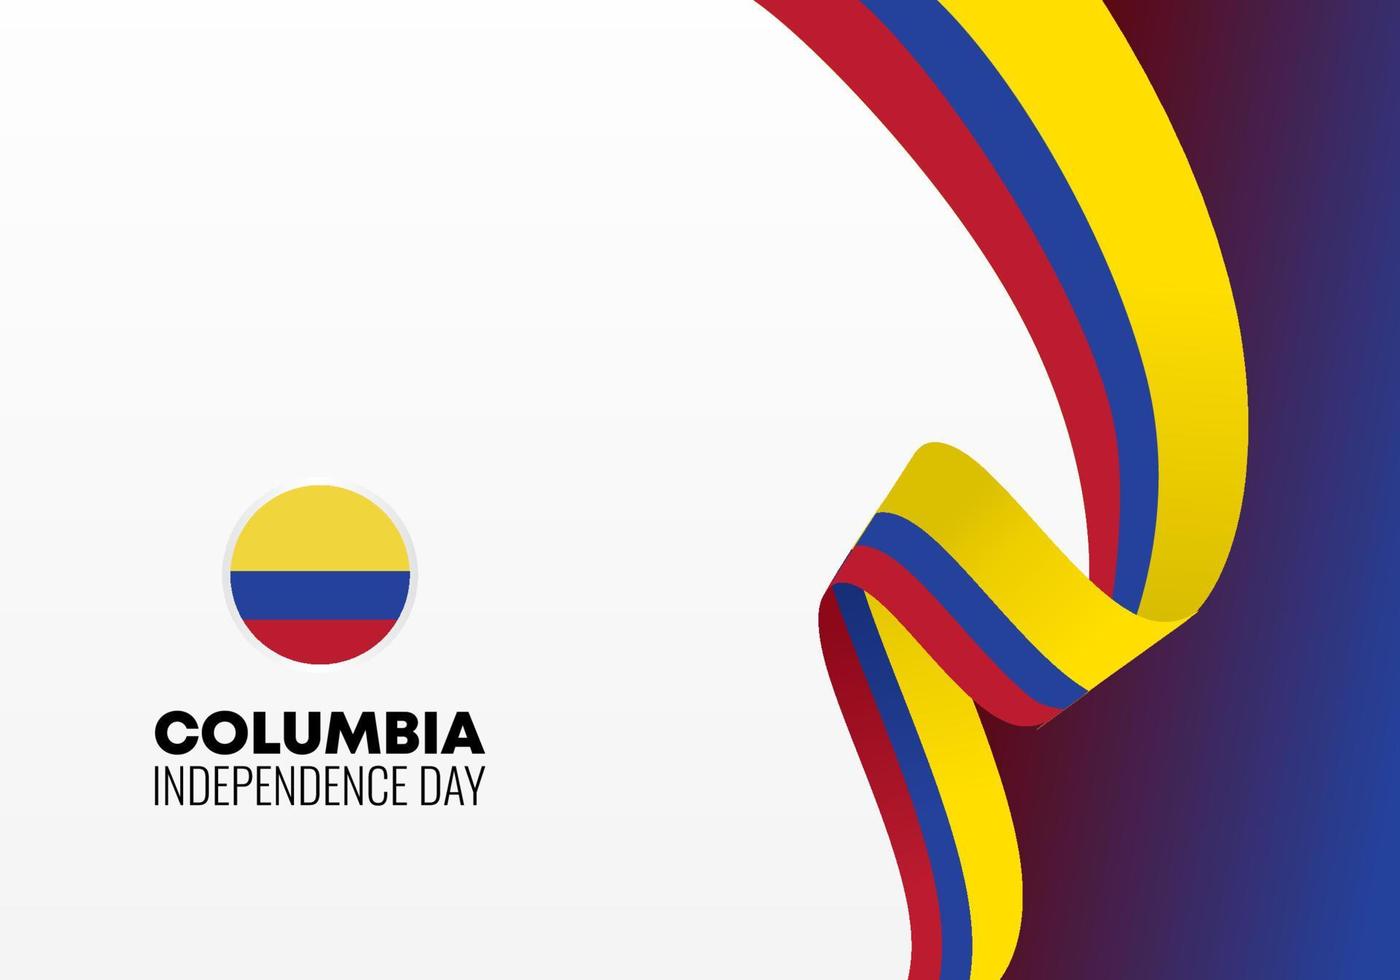 Columbia independence day for national celebration on July 20 th. vector